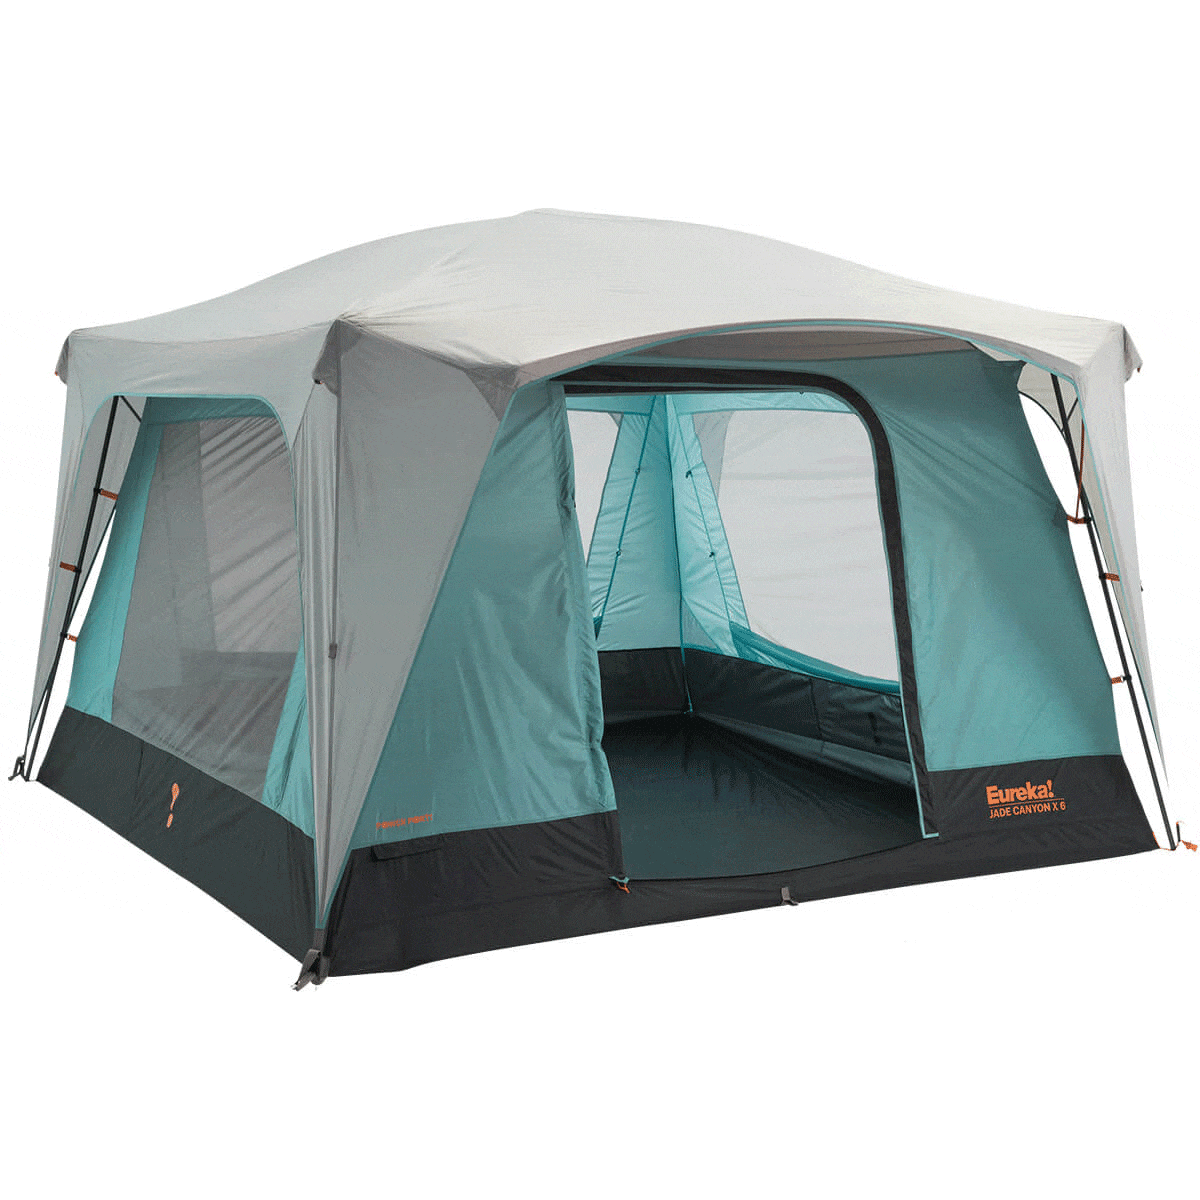 Jade Canyon X6 tent with fly on